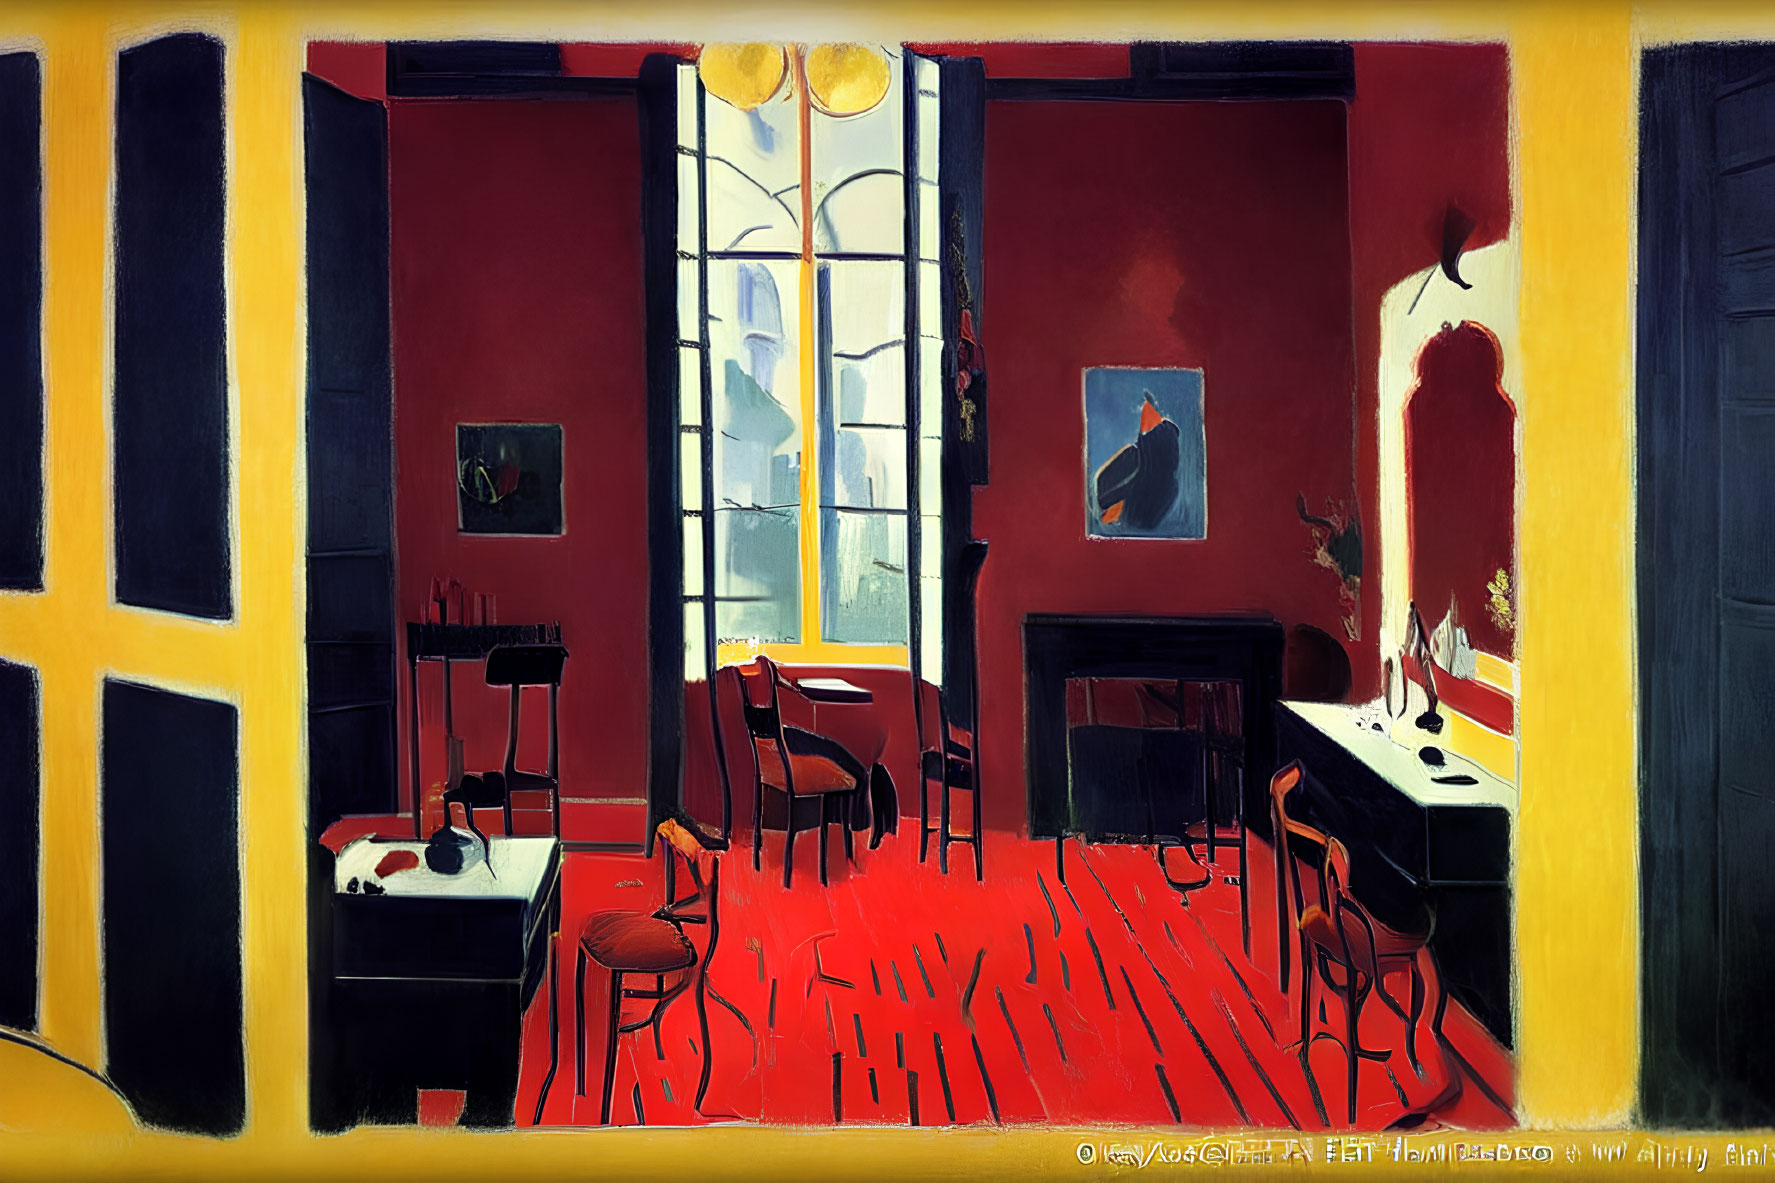 Stylized red room with black and yellow border, dining furniture, artworks, and open window.